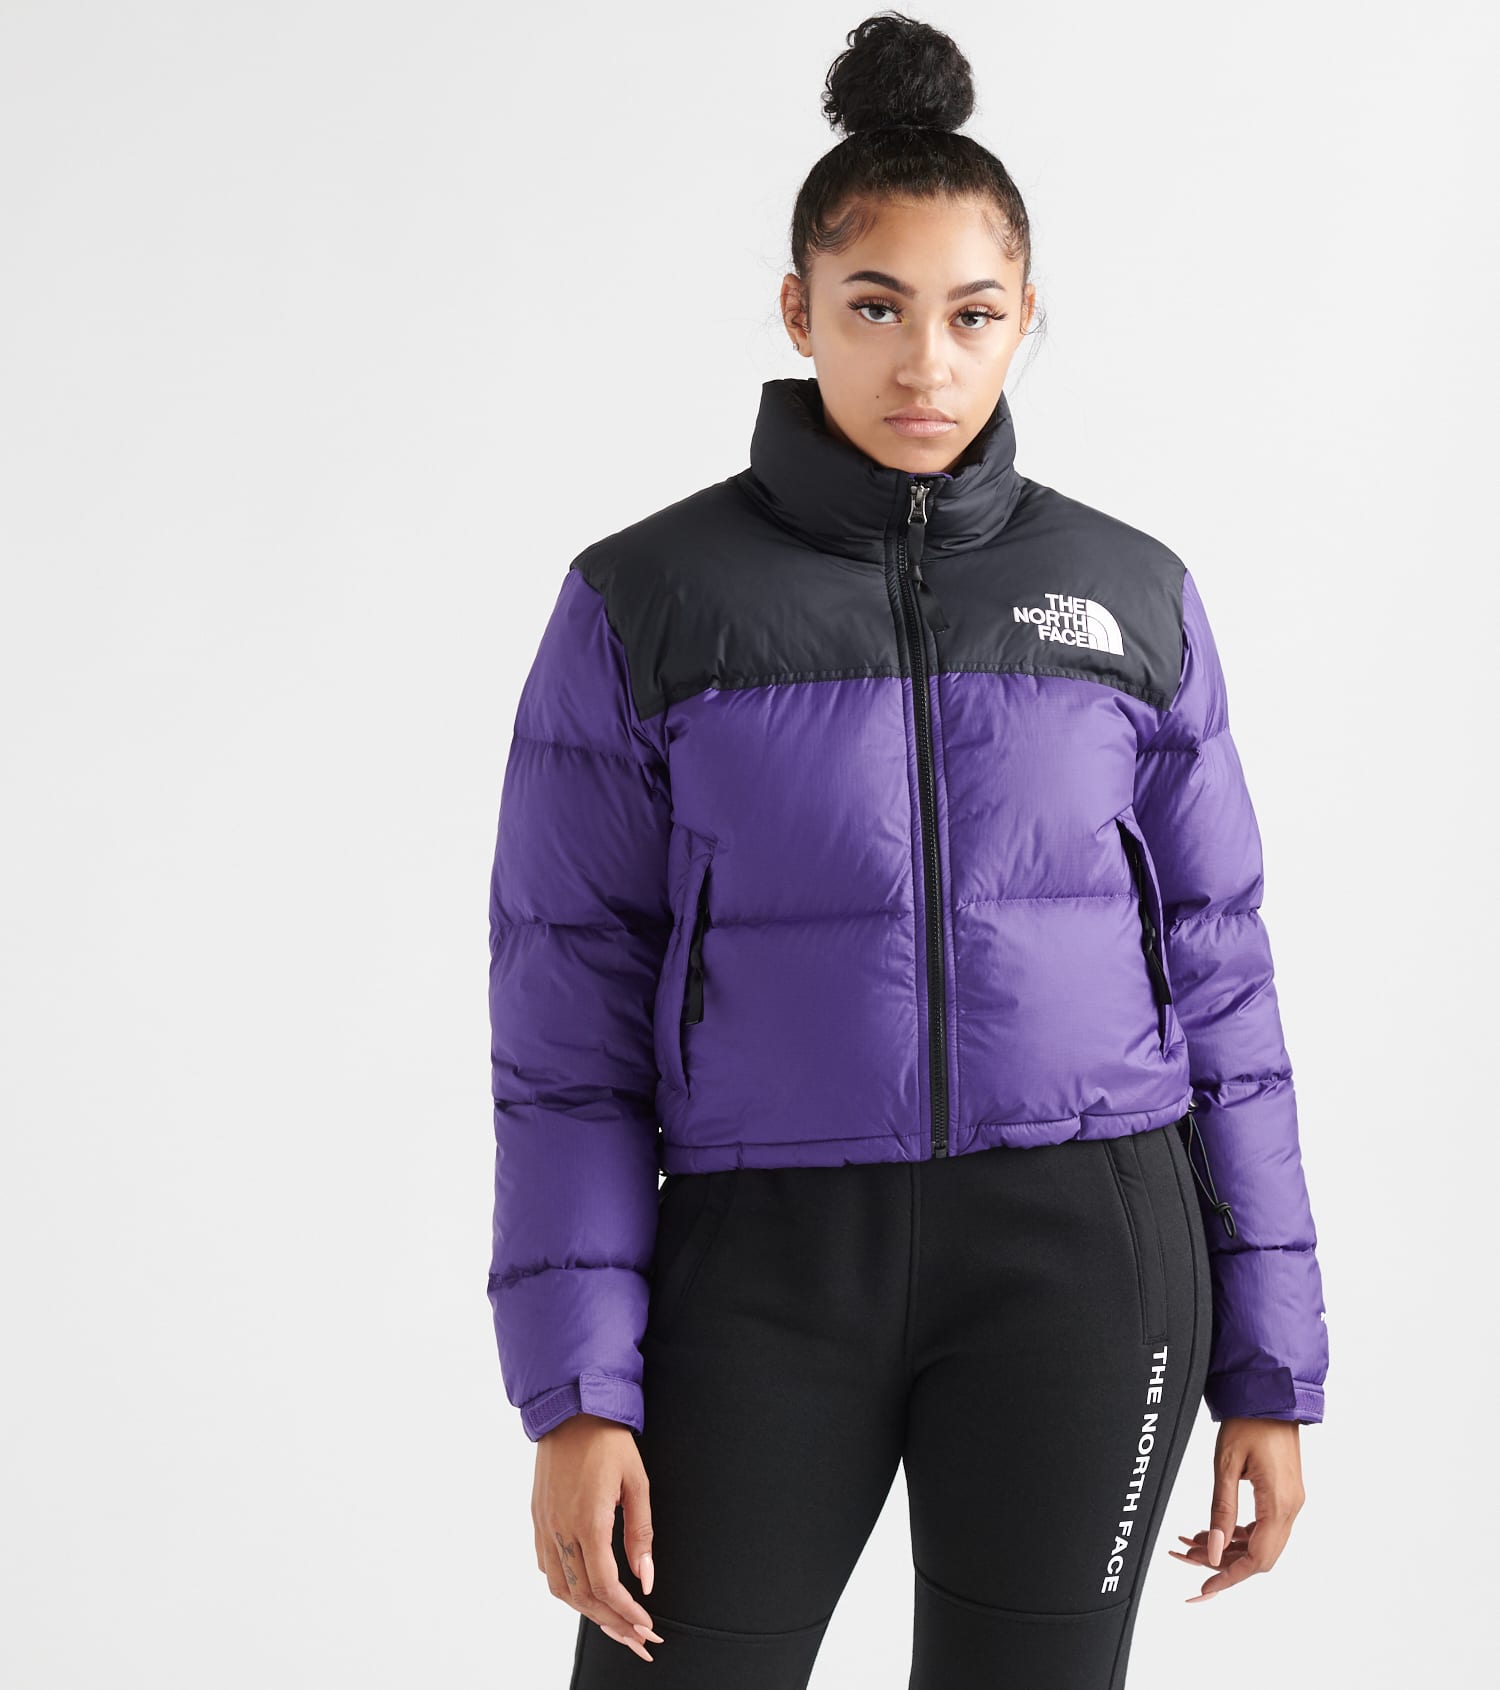 North Face Womens Puffa Jacket Cheaper Than Retail Price Buy Clothing Accessories And Lifestyle Products For Women Men